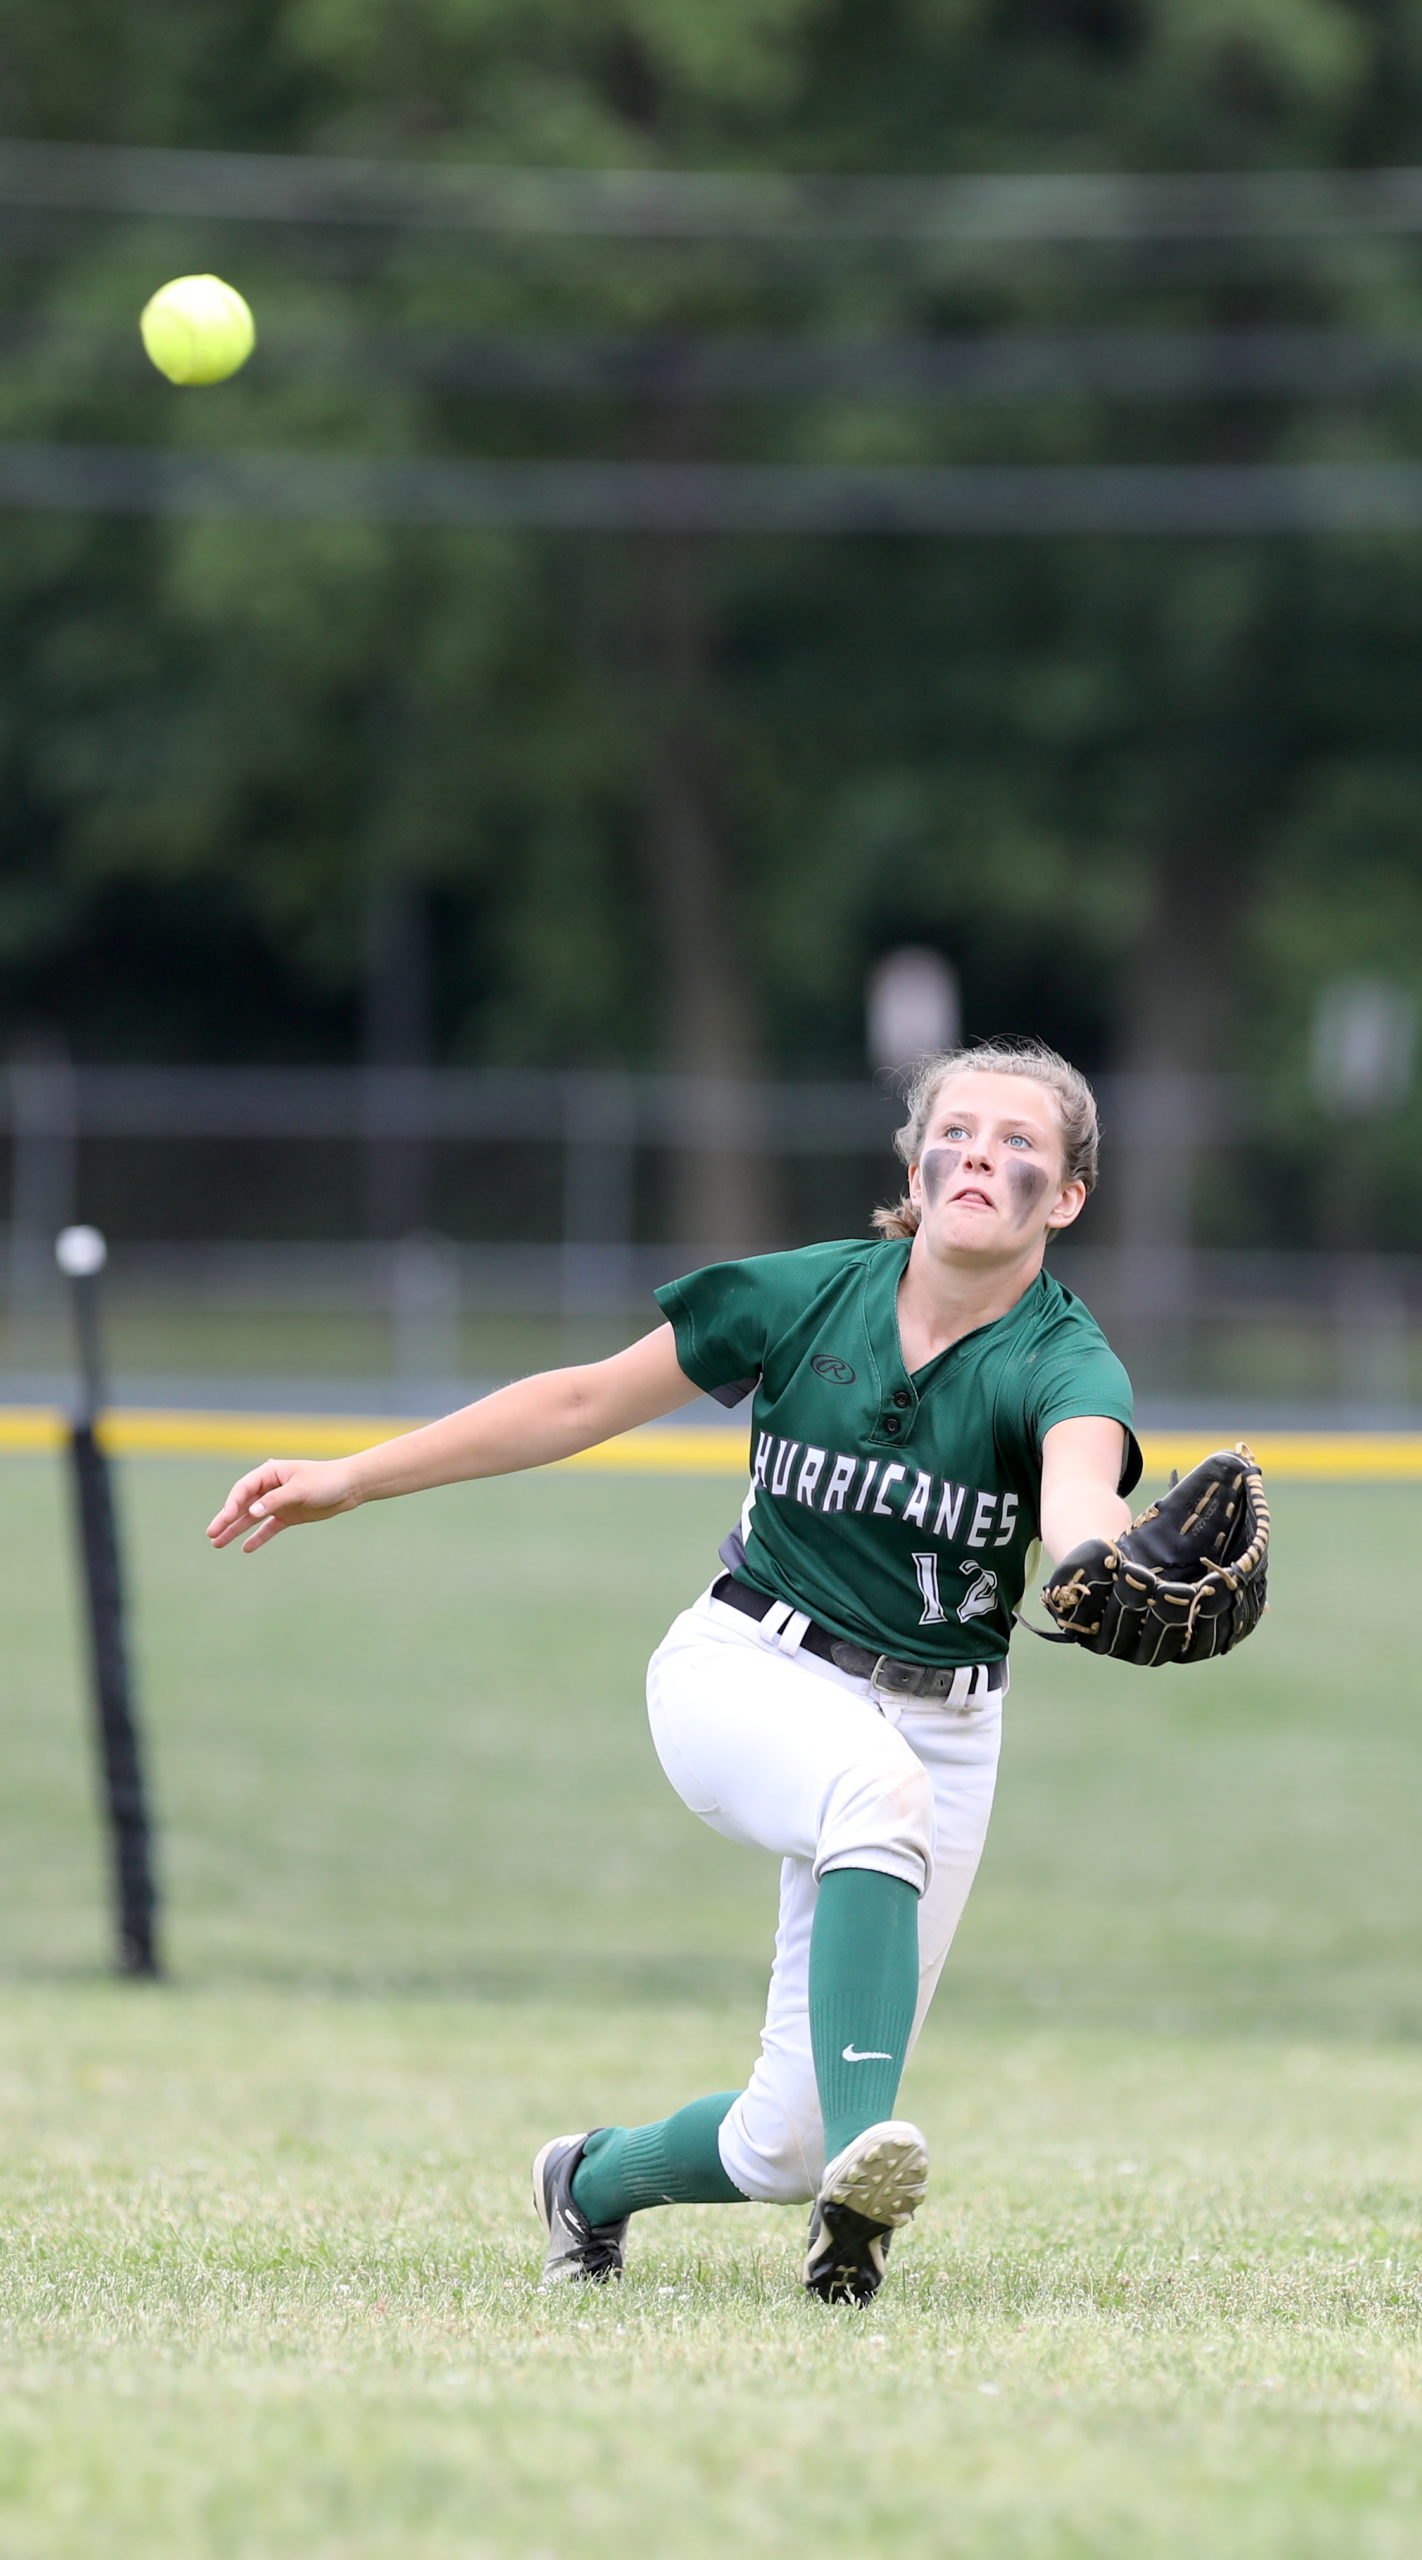 Westhampton Beach Lillie Henthorne races to make a diving grab in the outfield. CHRISTINE HEEREN